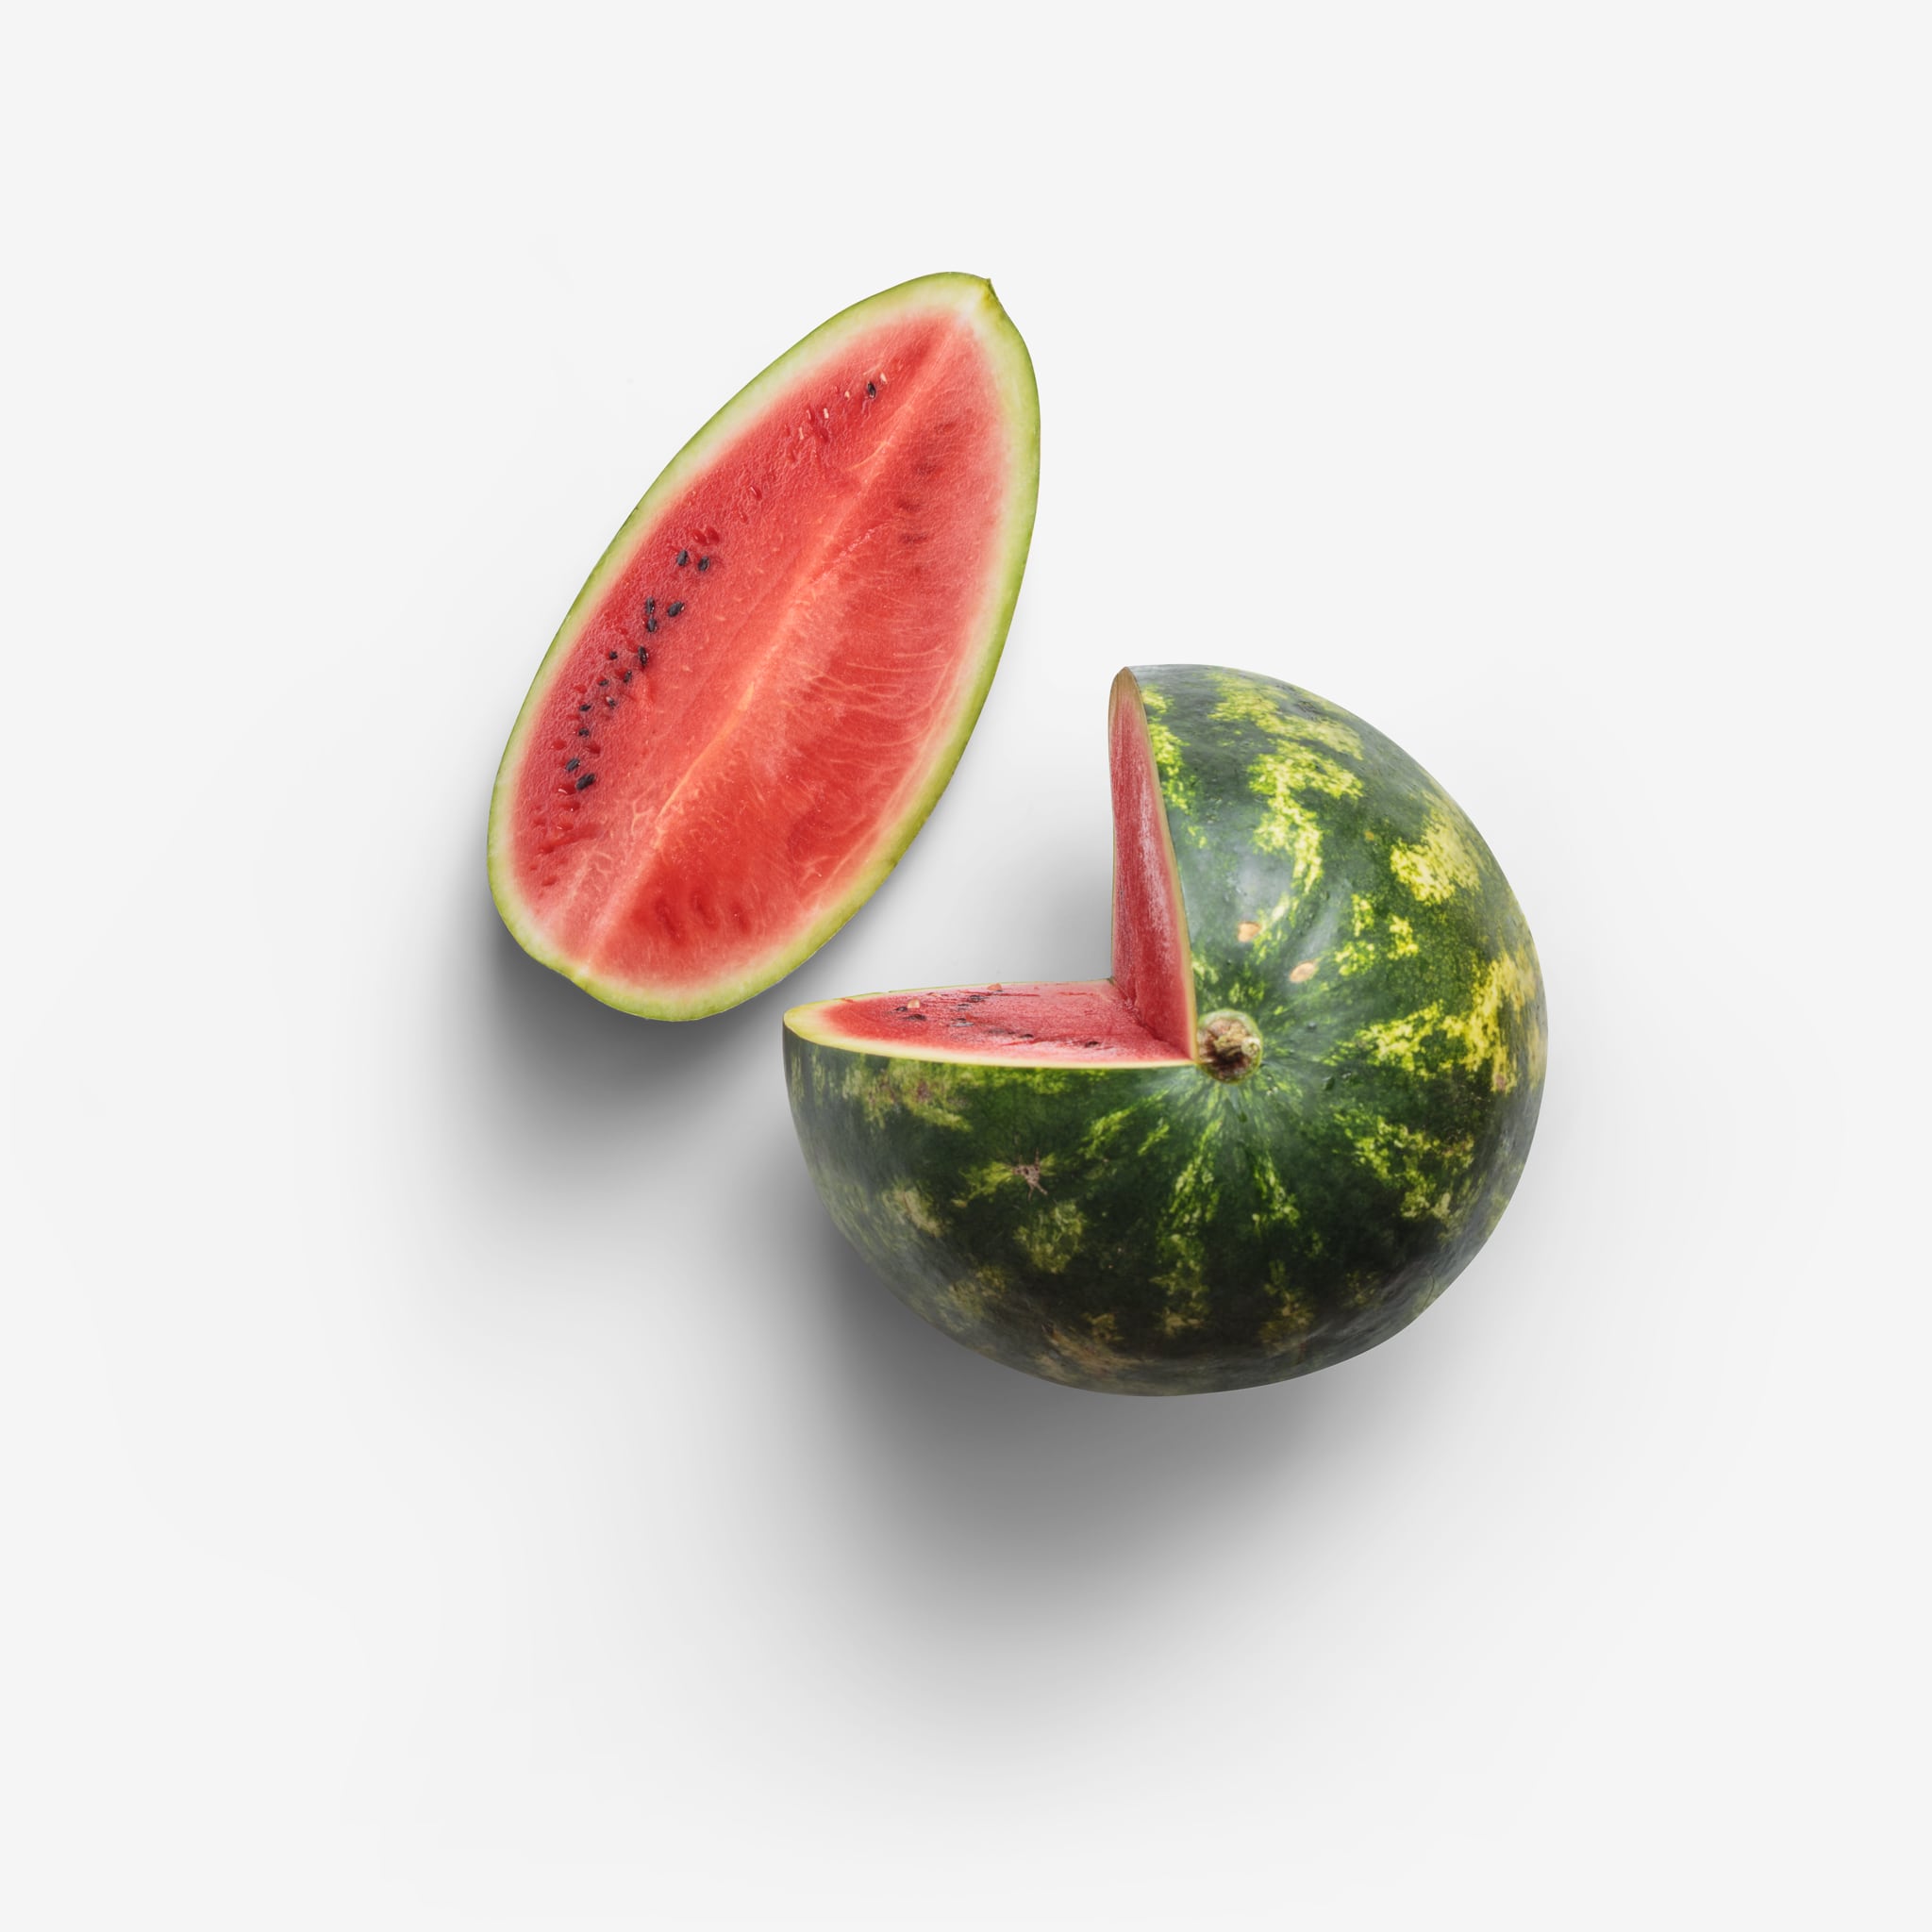 Watermelon PSD image with transparent background